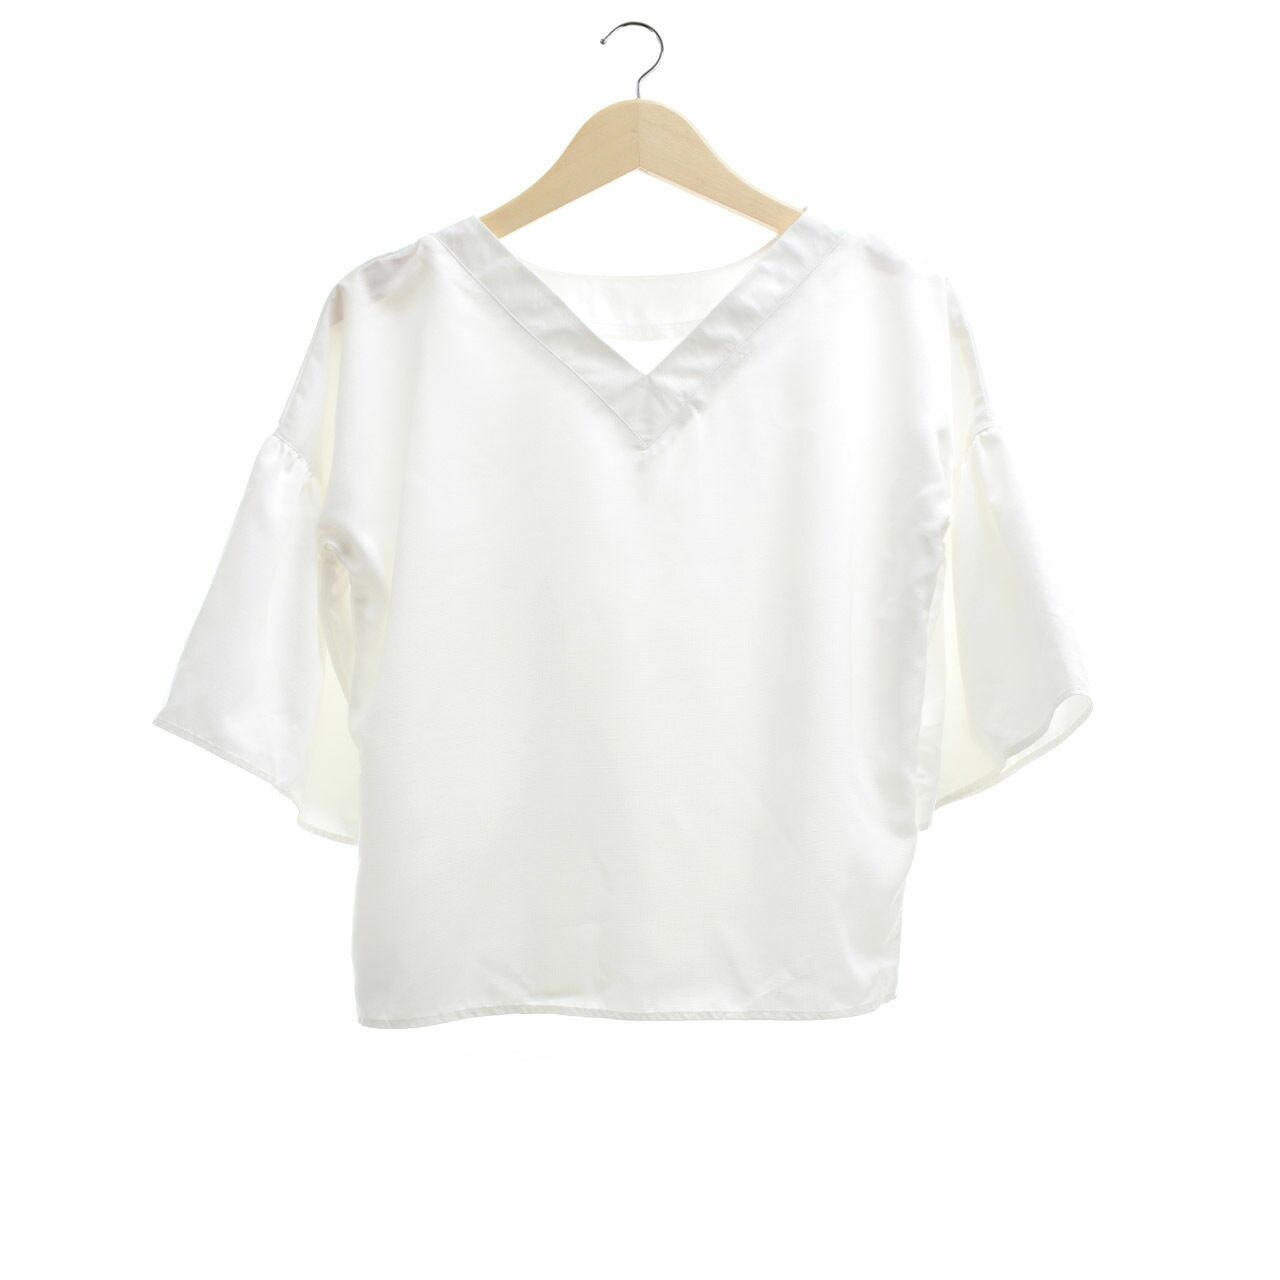 Five:13 Off White Blouse